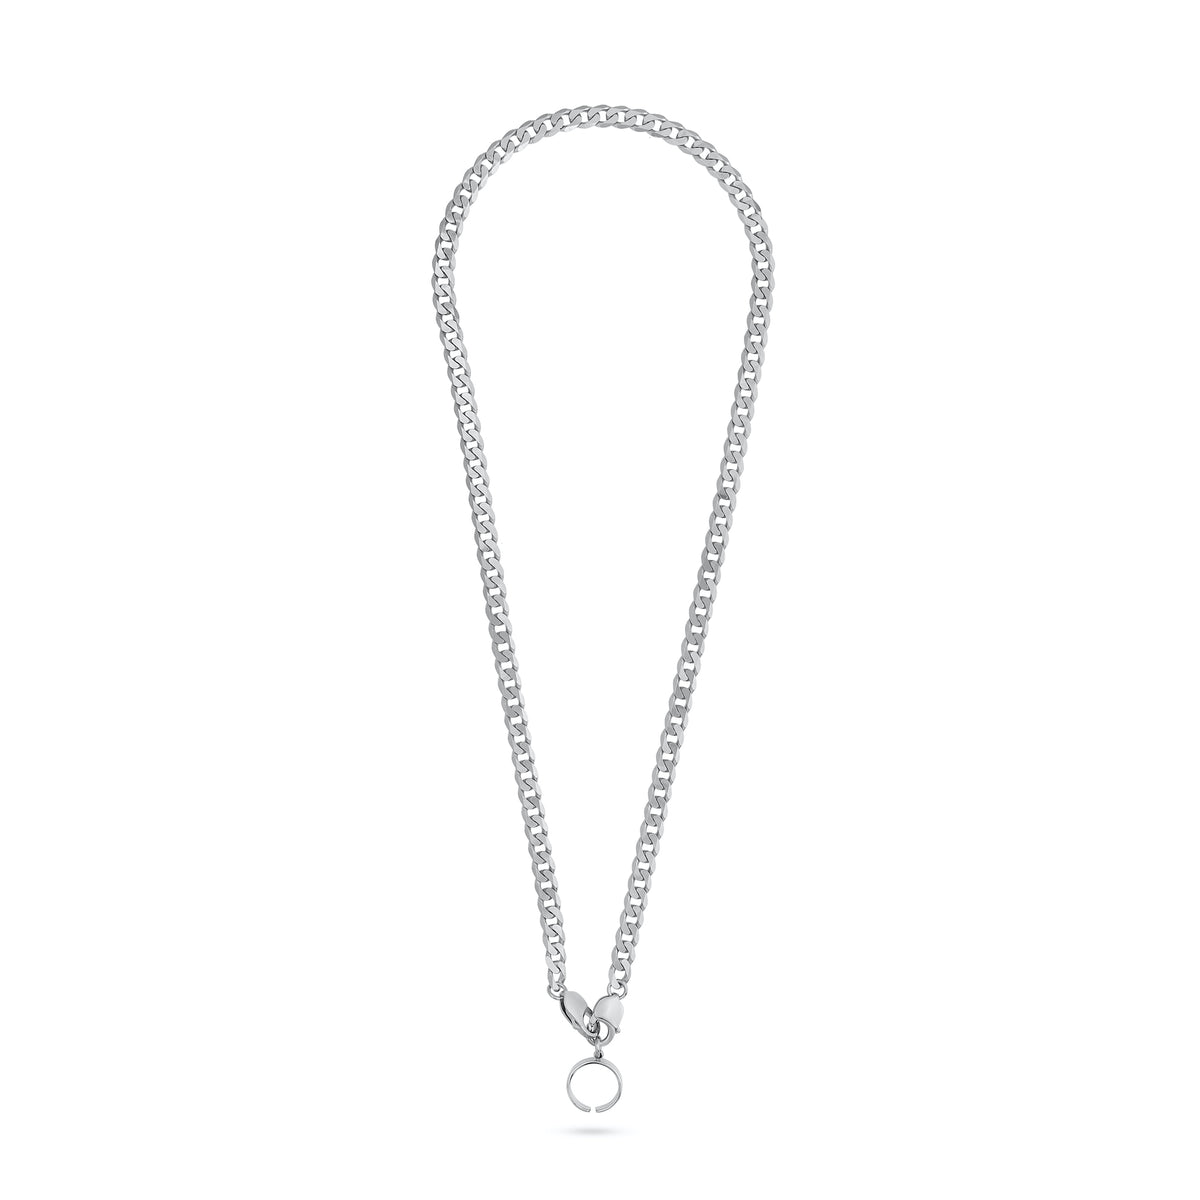 VIKA jewels self love collection wide chain necklace recycled sterling silver silber handmade bali sustainable ethical nachhaltig schmuck kette fusskette ankle anklet